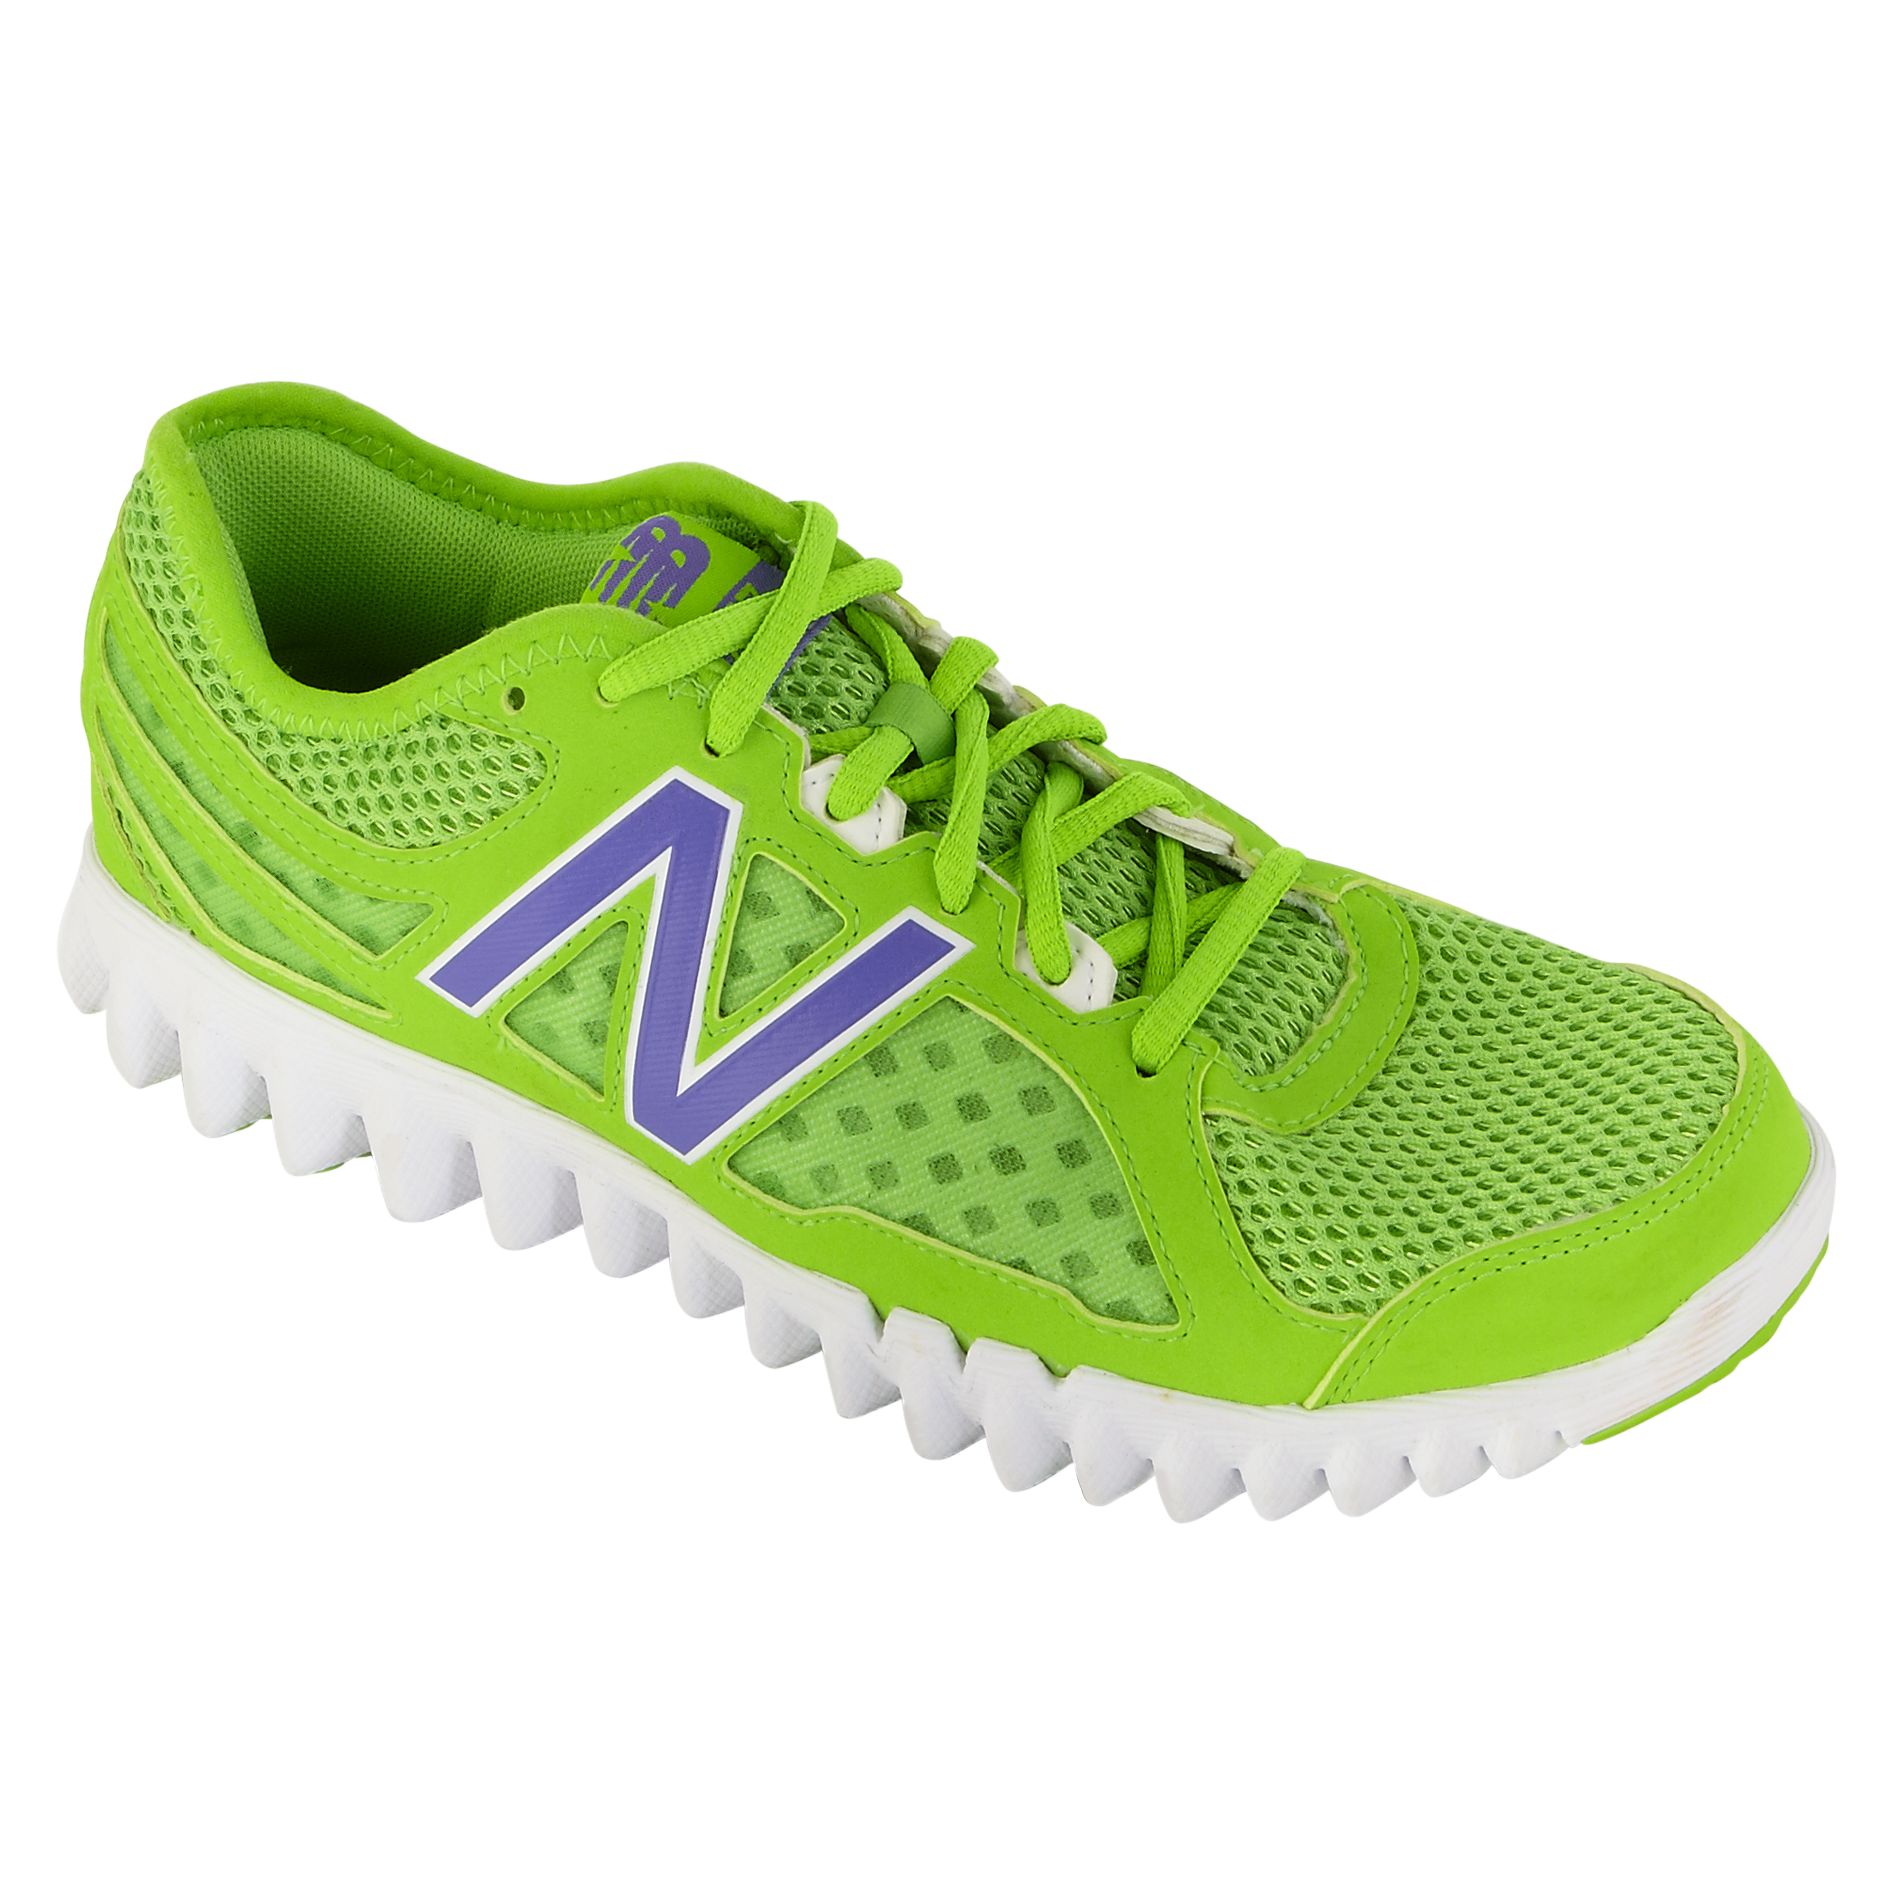 New Balance Women's 1157 GruveWide Athletic Shoe - Lime/Purple